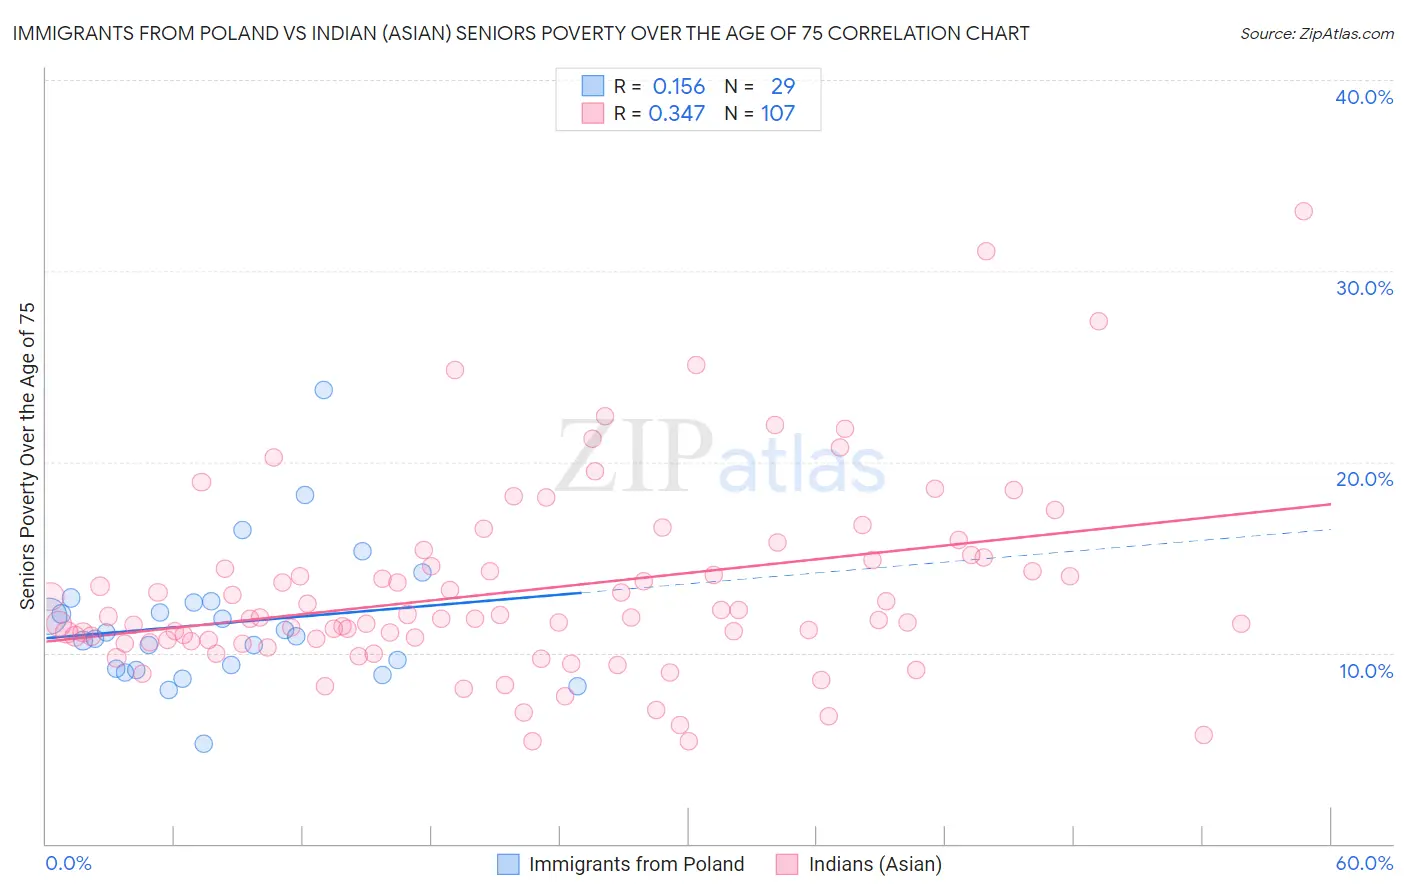 Immigrants from Poland vs Indian (Asian) Seniors Poverty Over the Age of 75